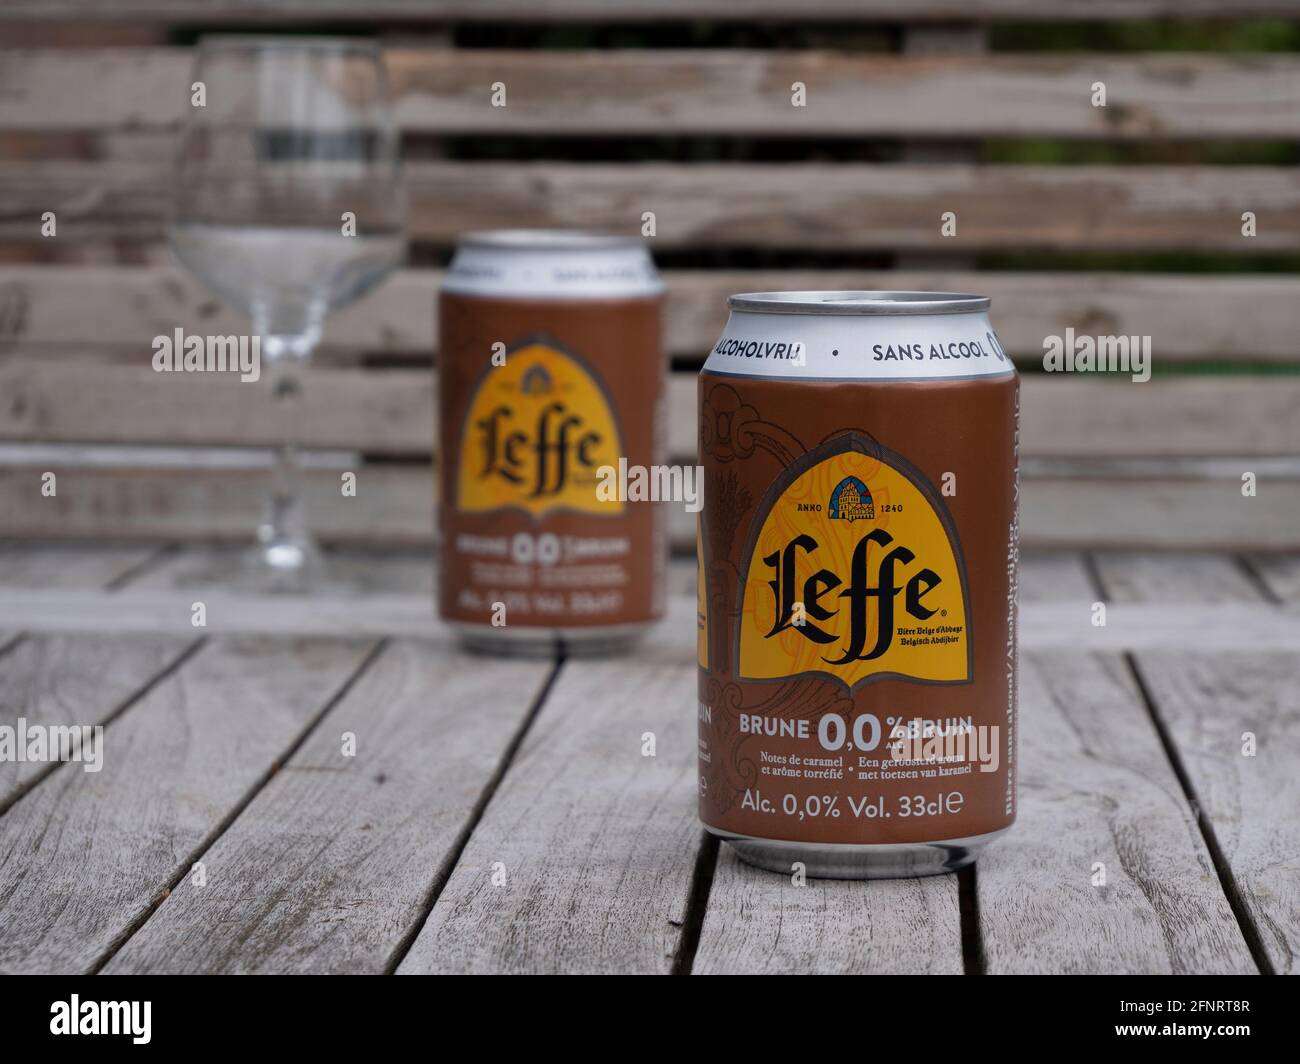 Sint Gillis Waas, Belgium, 16 May 2021, Two cans of Belgian abbey beer and a tasting glass, beer without alcohol, Leffe brown. Stock Photo